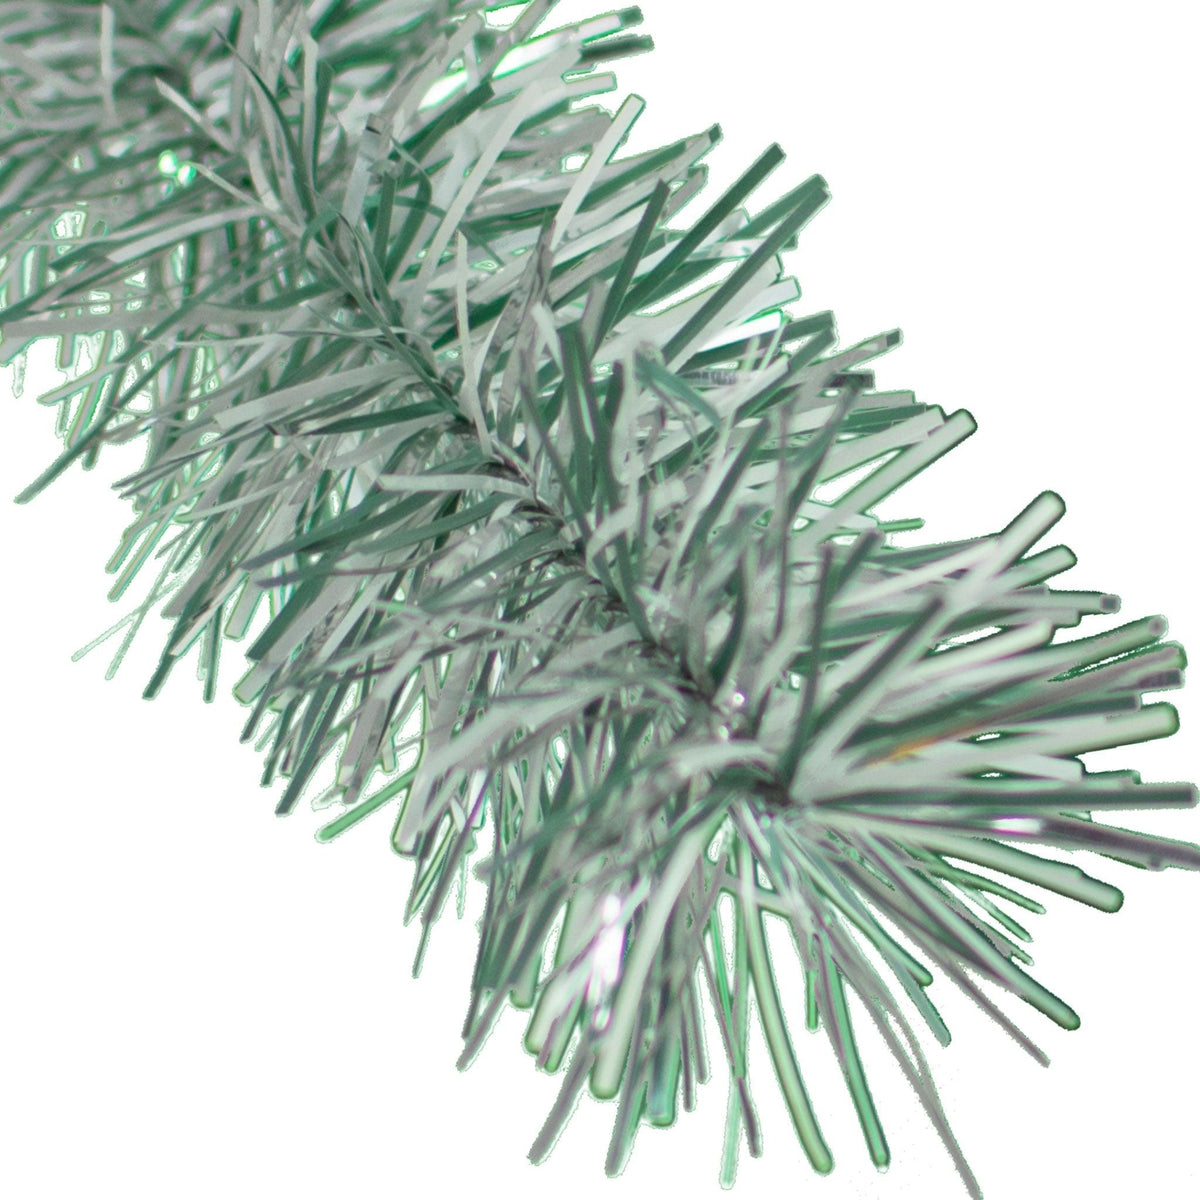 Lee Display's brand new 25ft Shiny White and Green Tinsel Garlands and Fringe Embellishments on sale at leedisplay.com